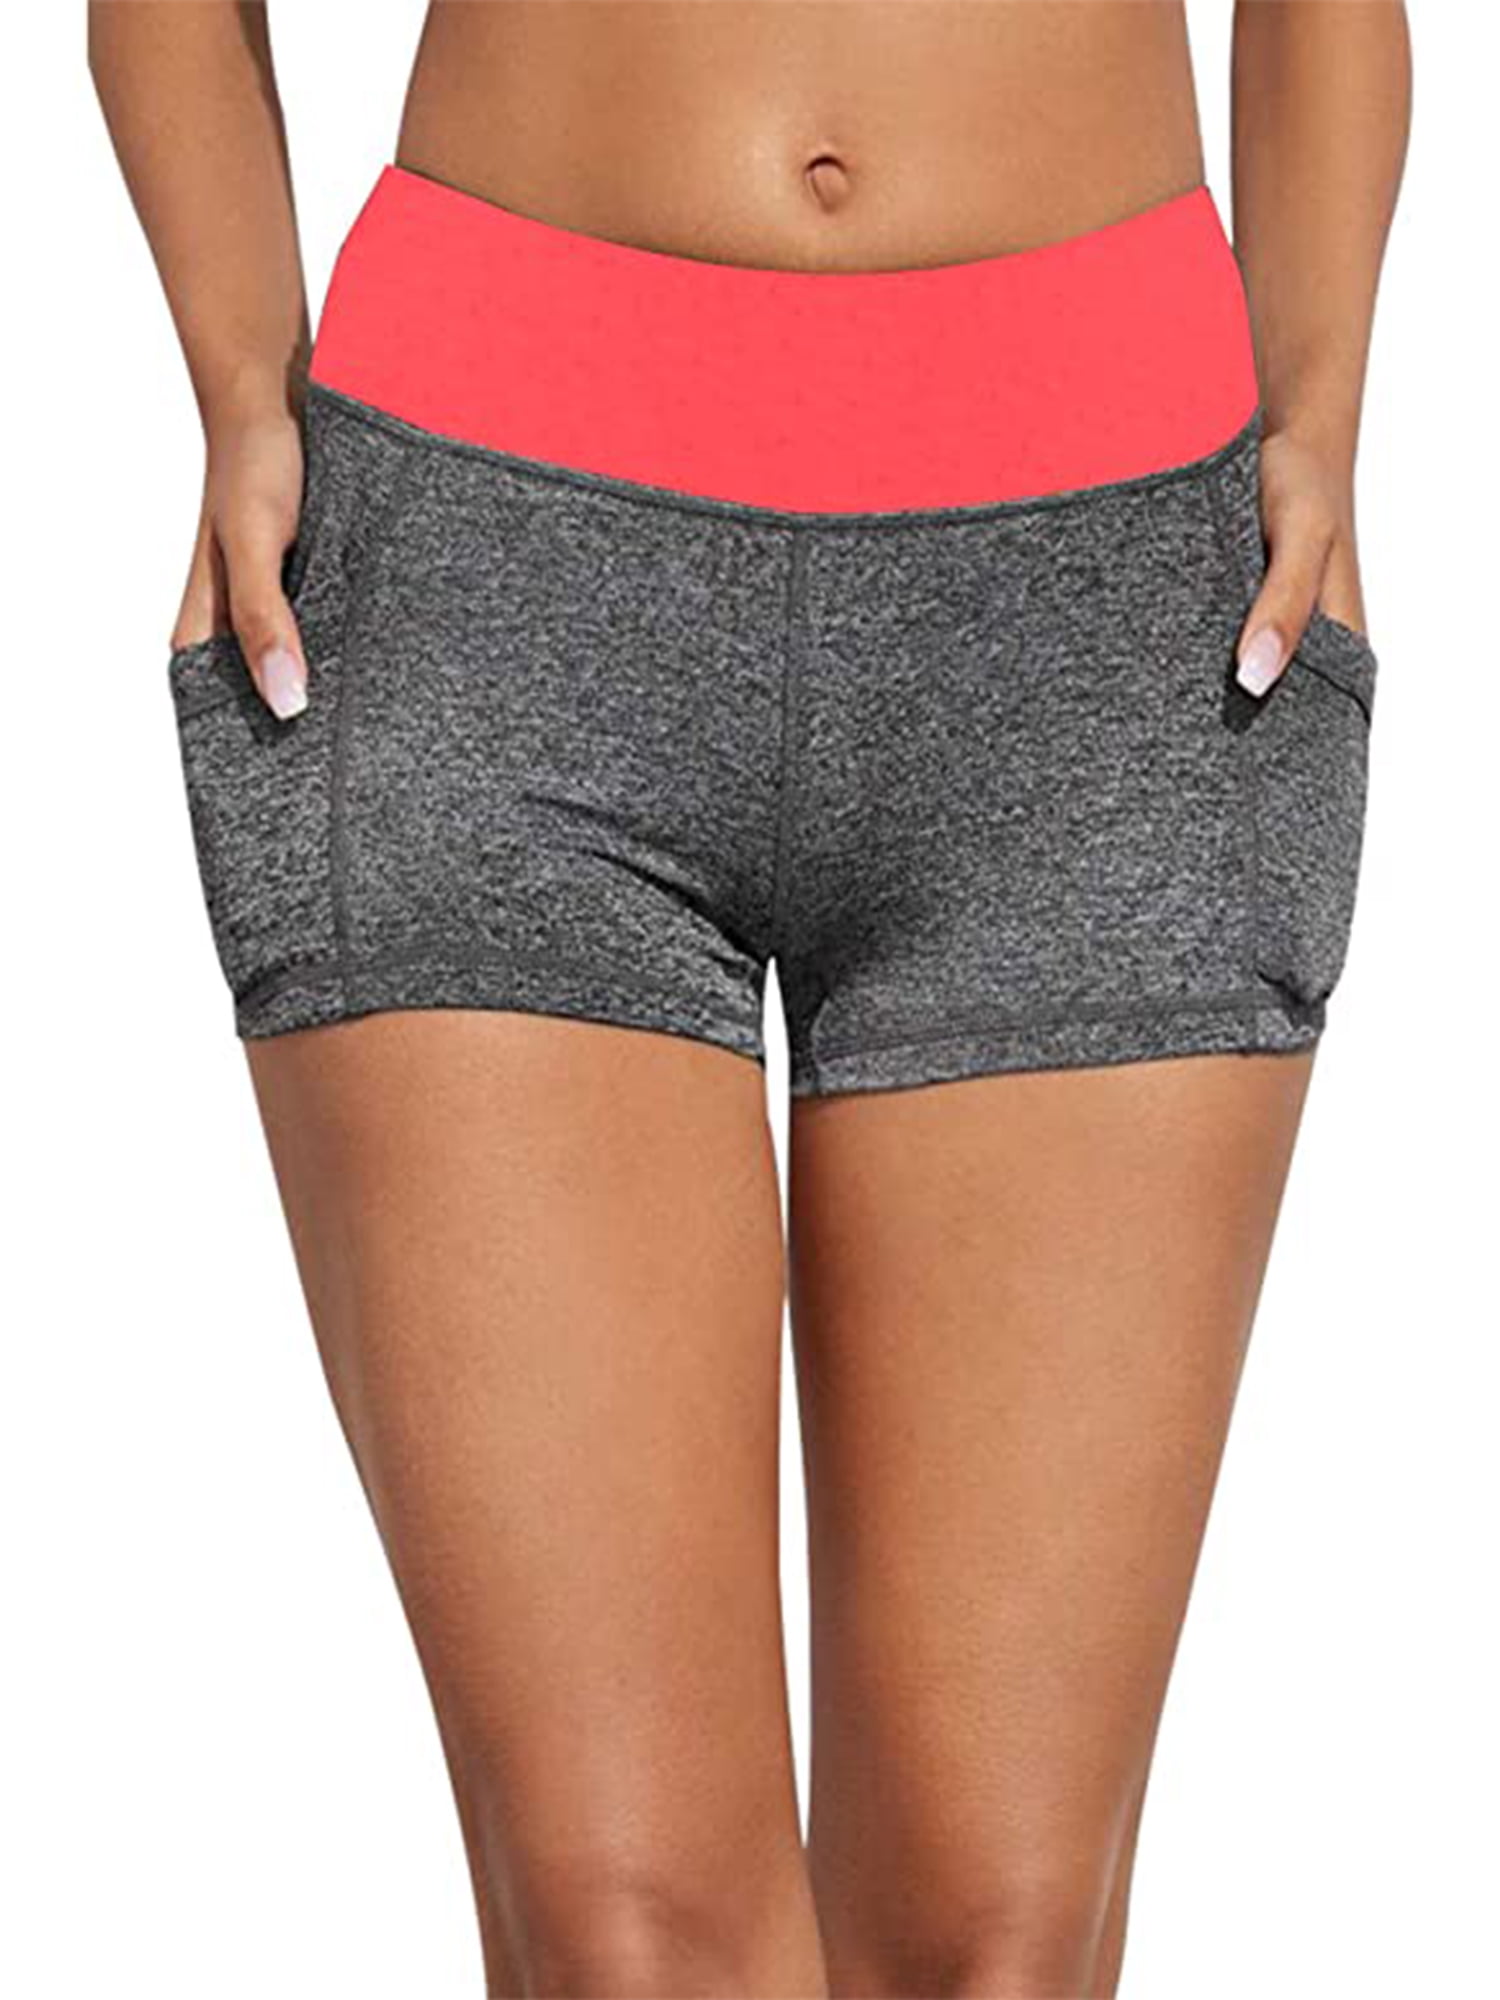 5 Day Best Workout Shorts For Thick Thighs for Beginner